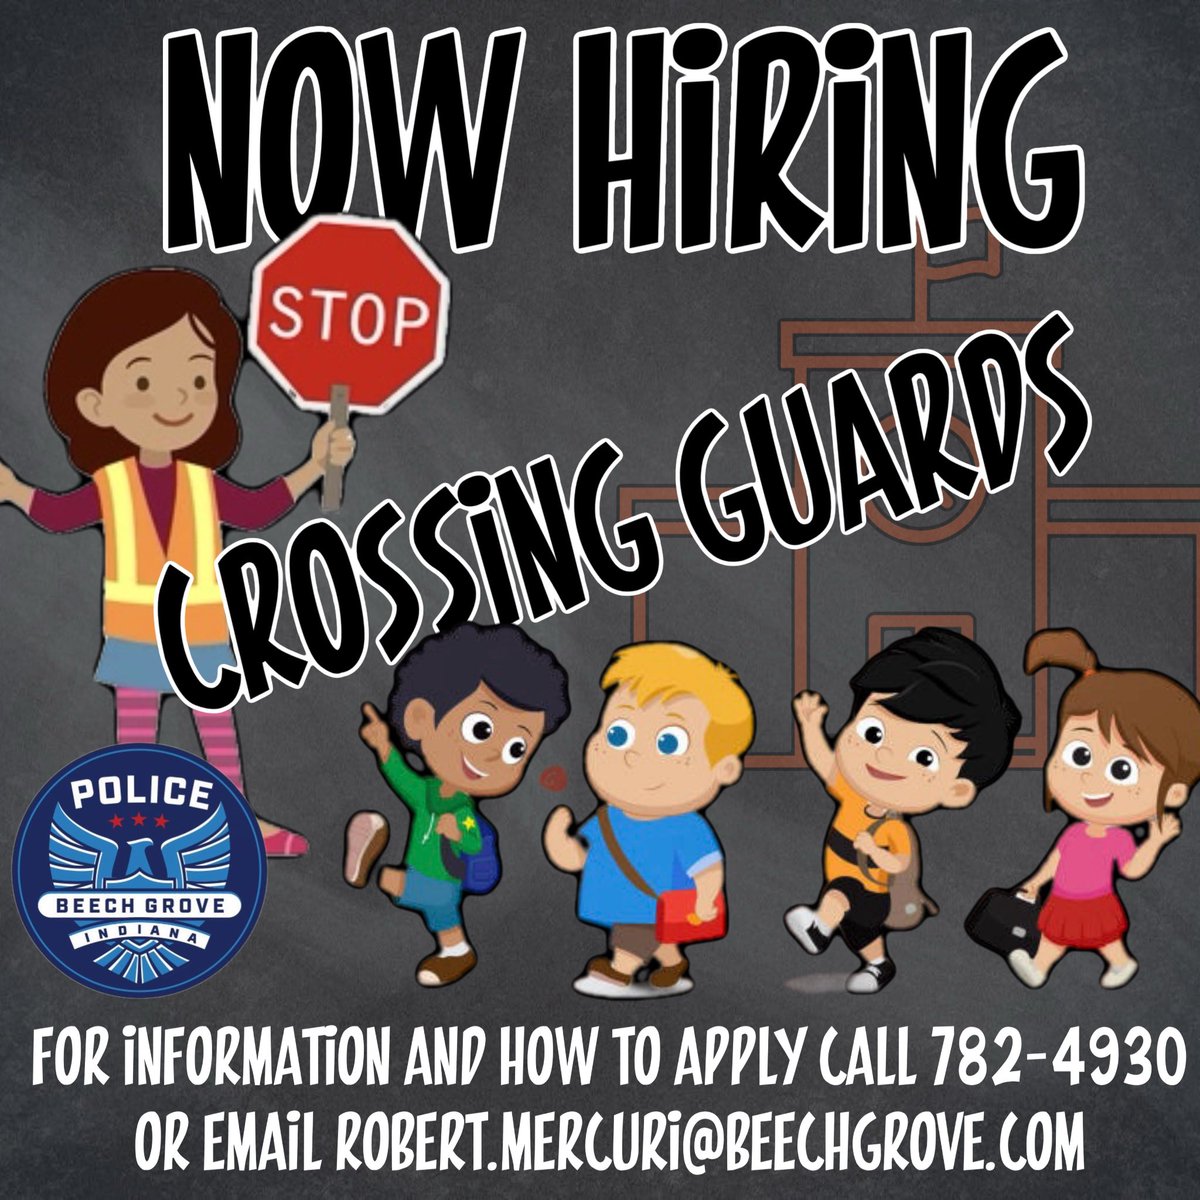 🛑 Now hiring: Crossing Guards 🛑 Short hours, fresh air, and an endless supply of smiles upon our Beech Grove students 😊! Apply at the Beech Grove Police Department or call 782-4930 or email Robert.Mercuri@Beechgrove.com for more information.